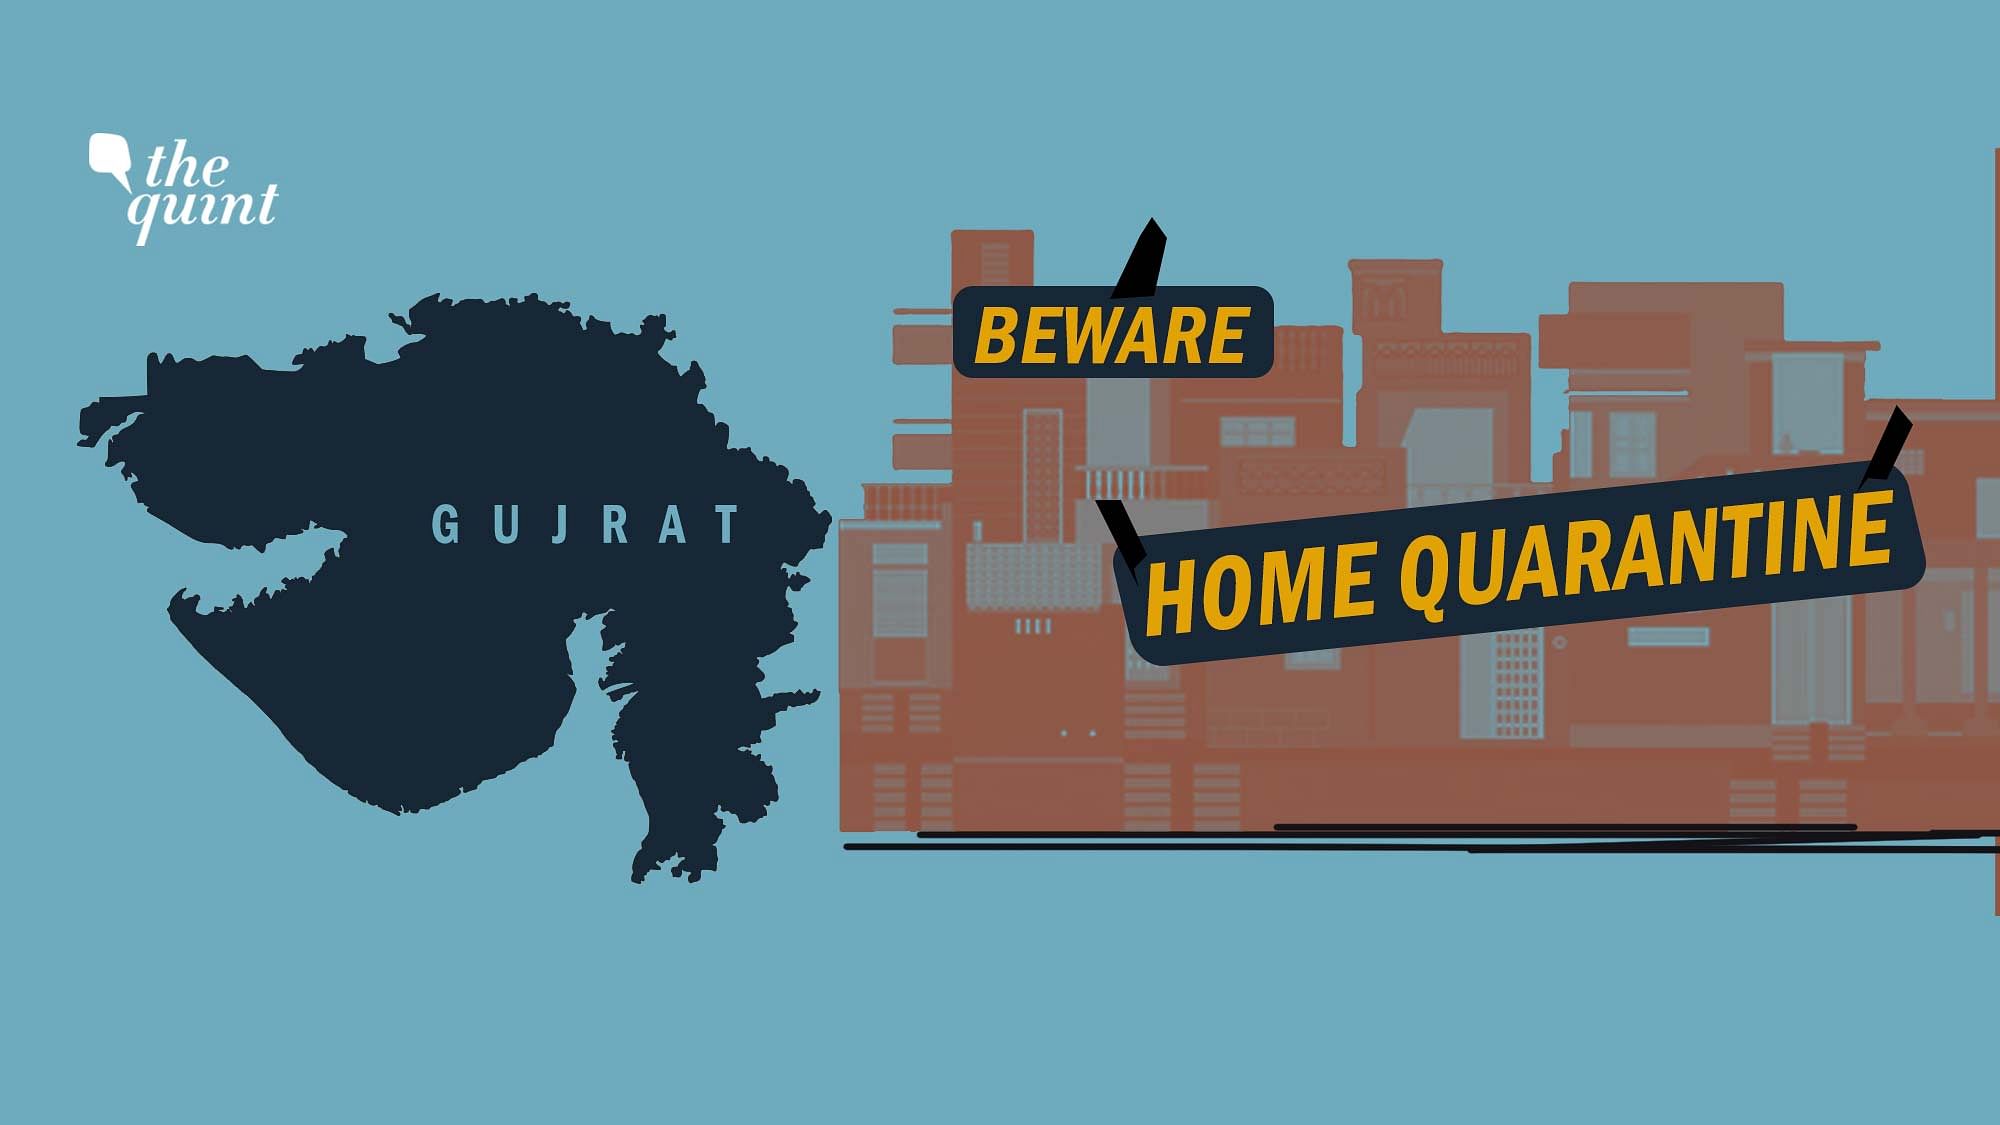 Rais Khan Pathan says although he lives in Delhi, AMC pasted a “quarantine” sticker outside his Ahmedabad home on 1 April.